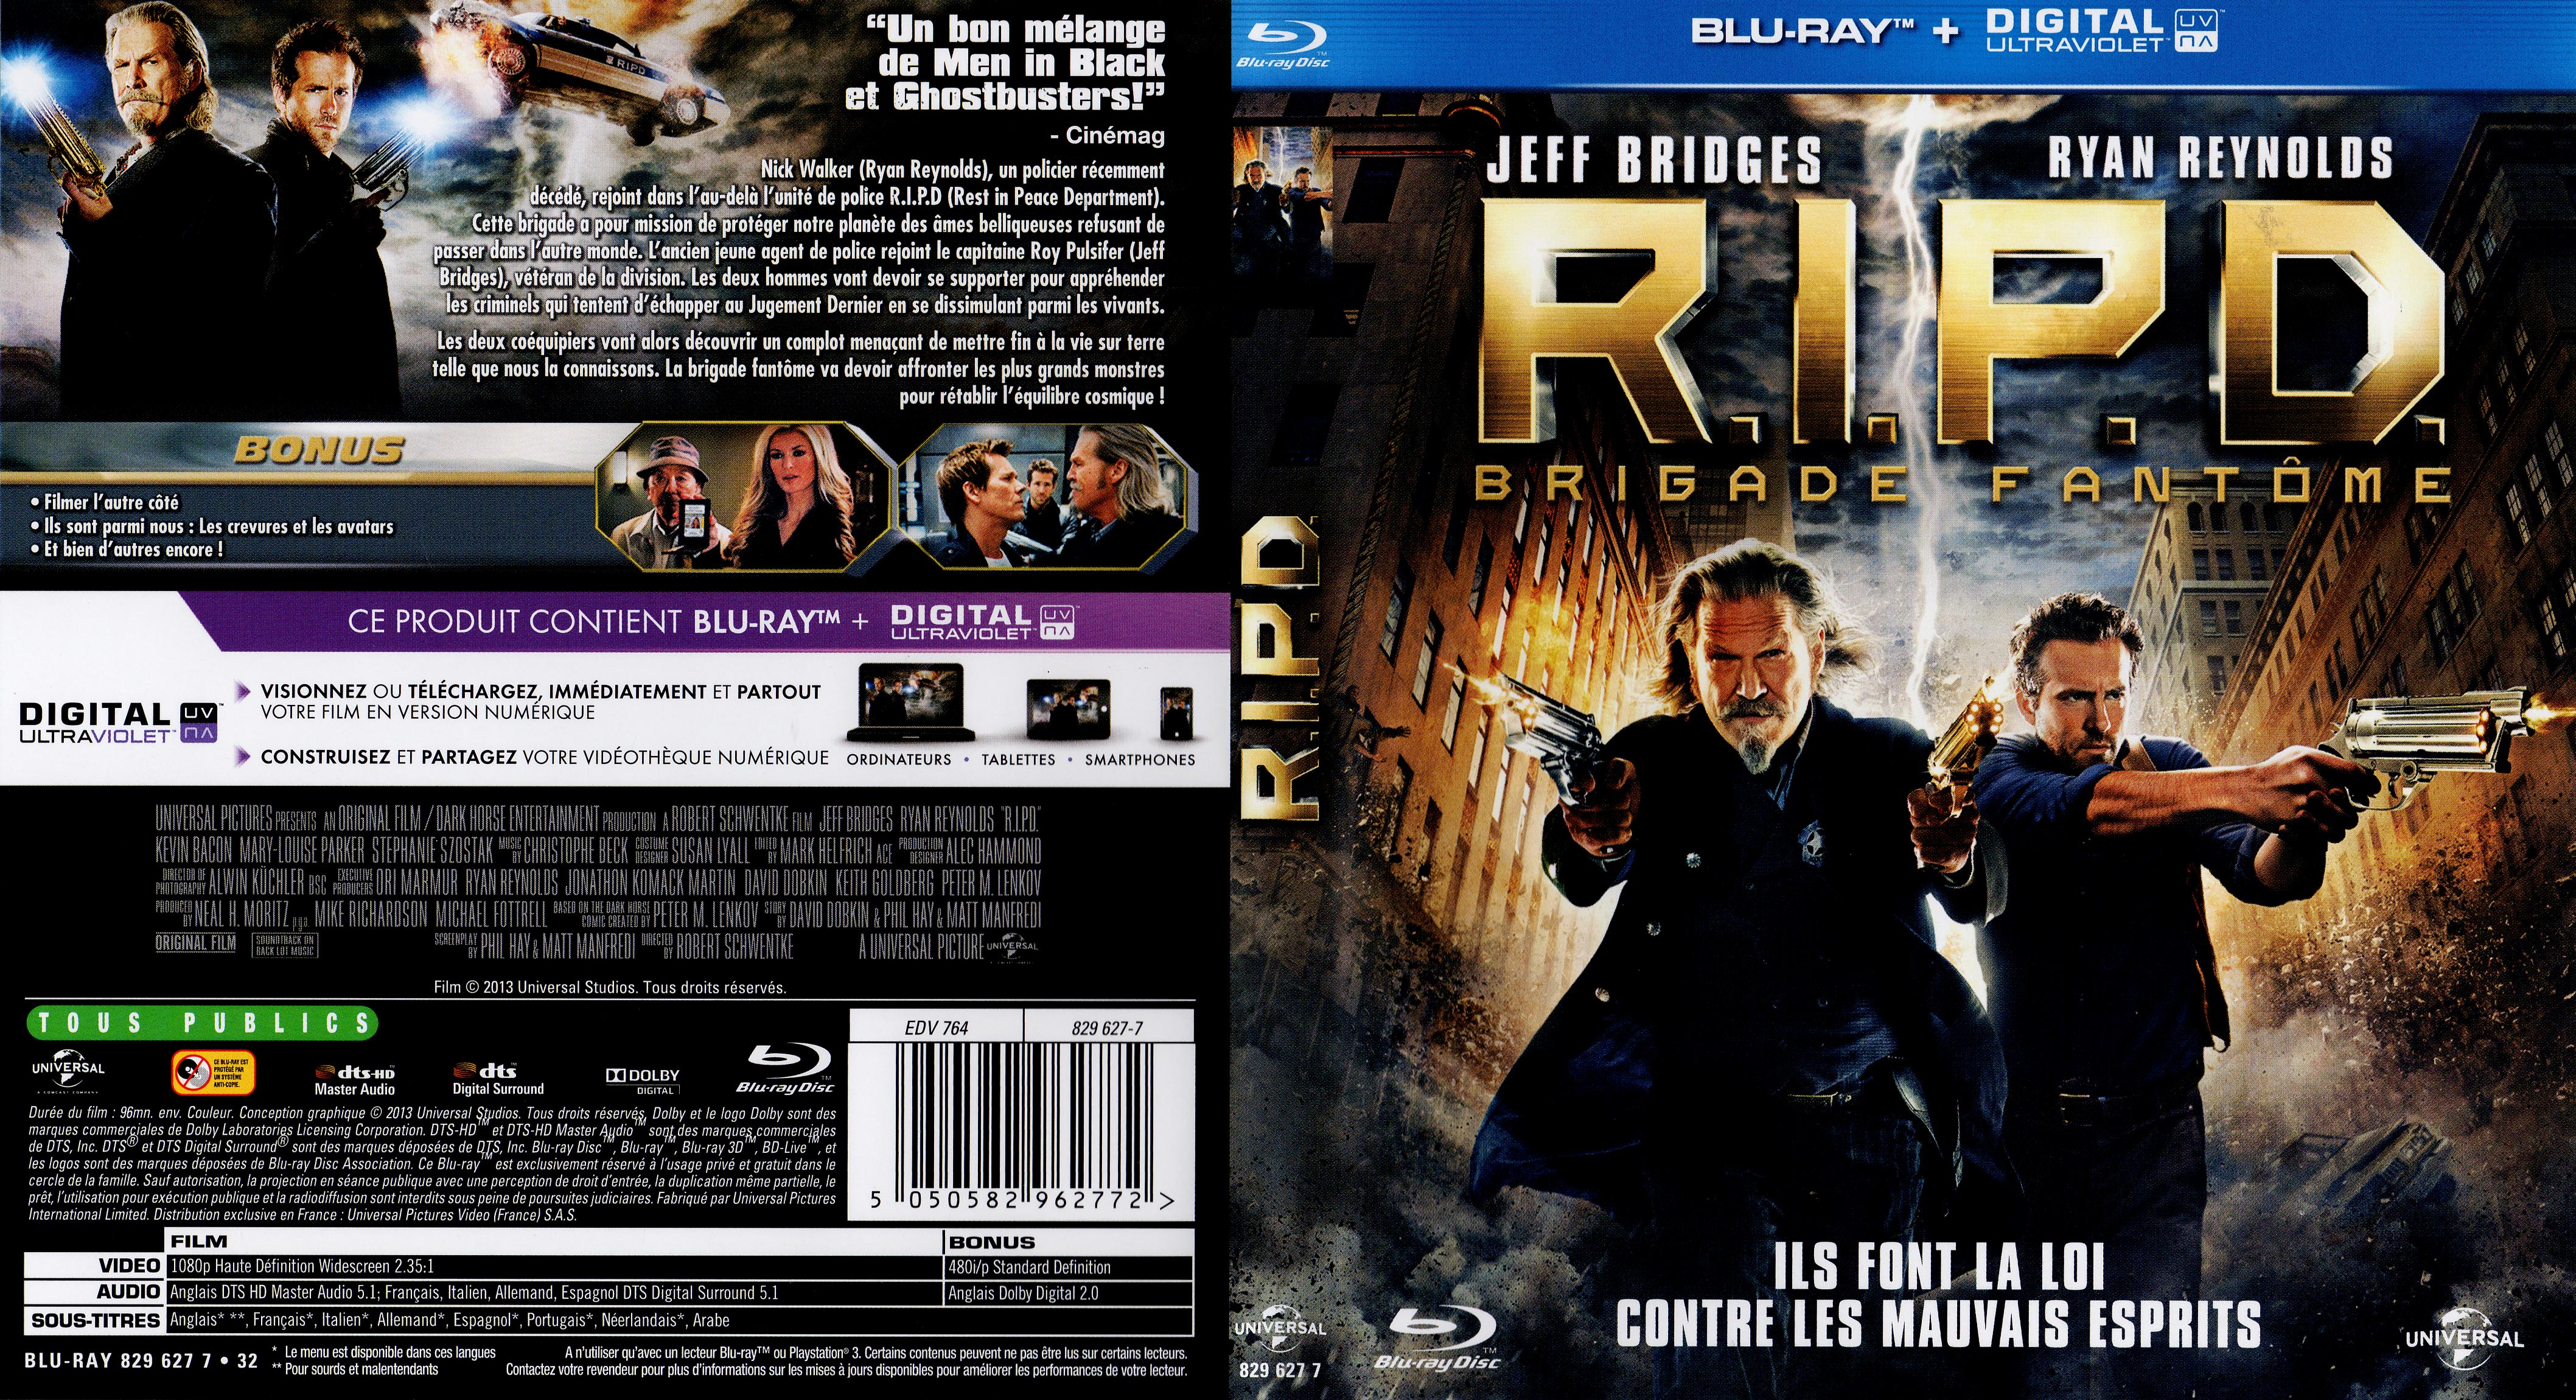 Jaquette DVD R.I.P.D. (BLU-RAY)